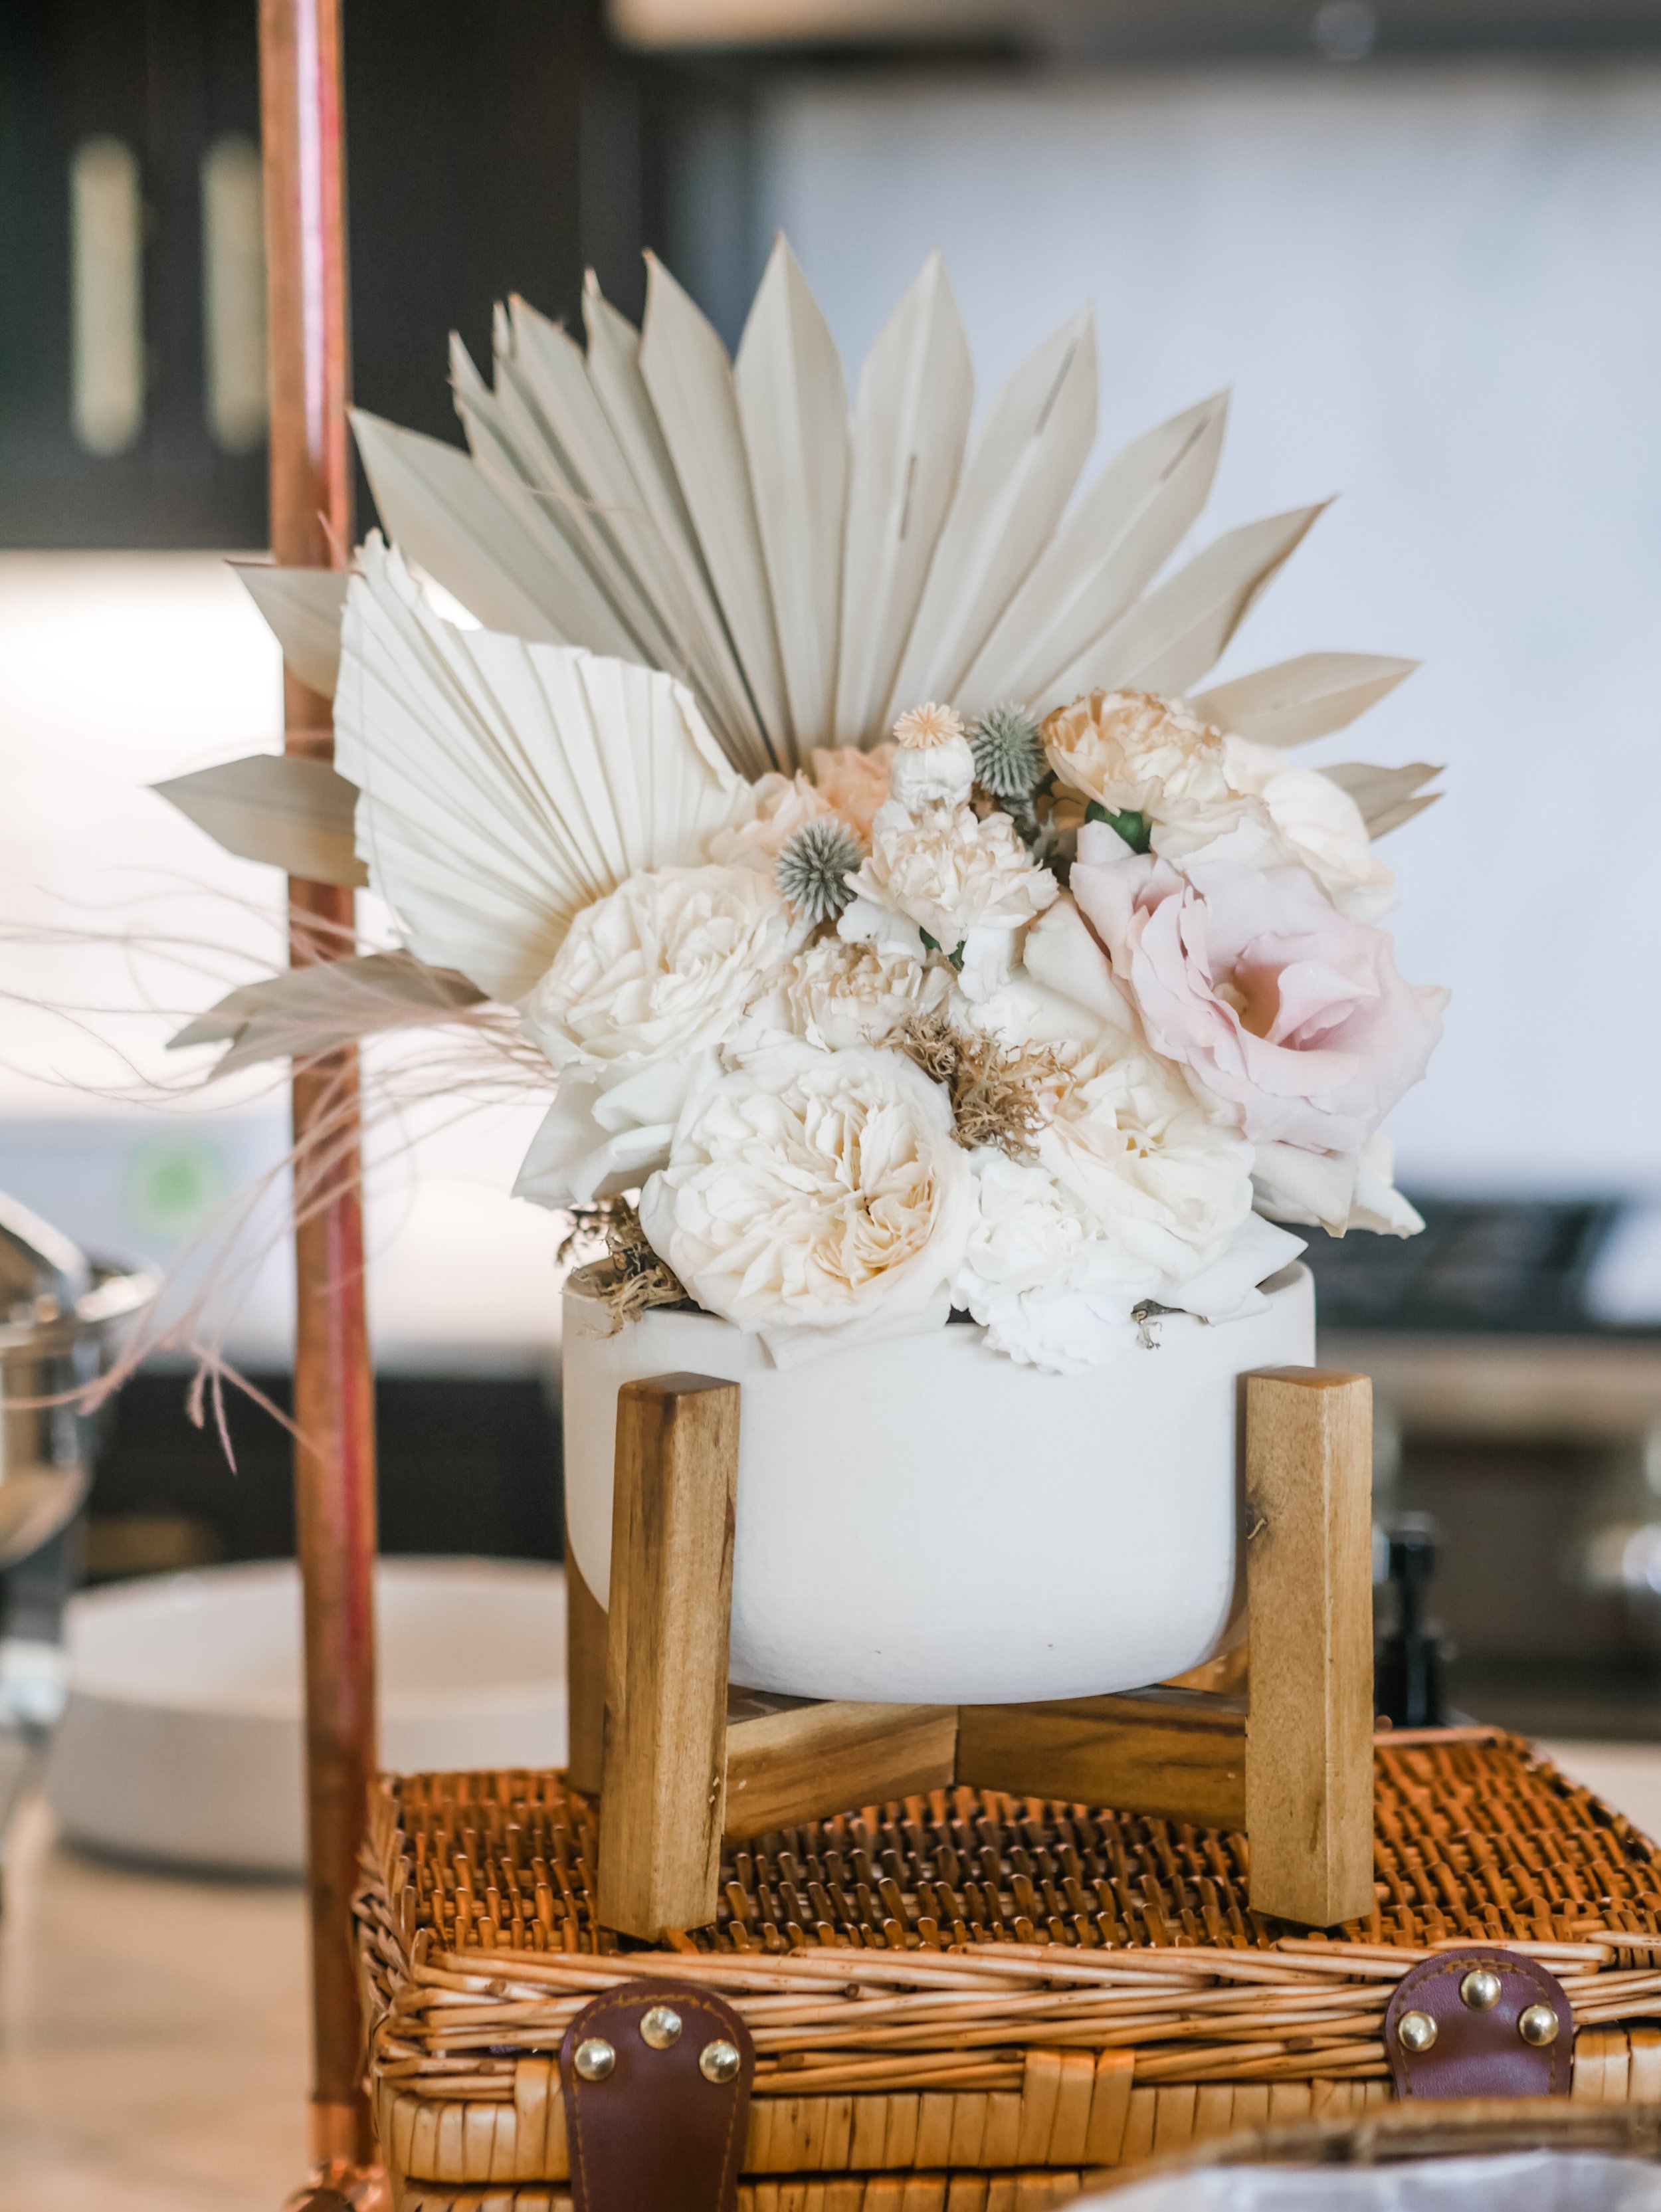  Host a stylish and relaxed Tulum beach-inspired Baby Shower with these ideas for food bar, drink station, picnic style seating, decor and more from event designer Carolina of MINT Event Design in Austin, Texas. Get details and tons more party inspir